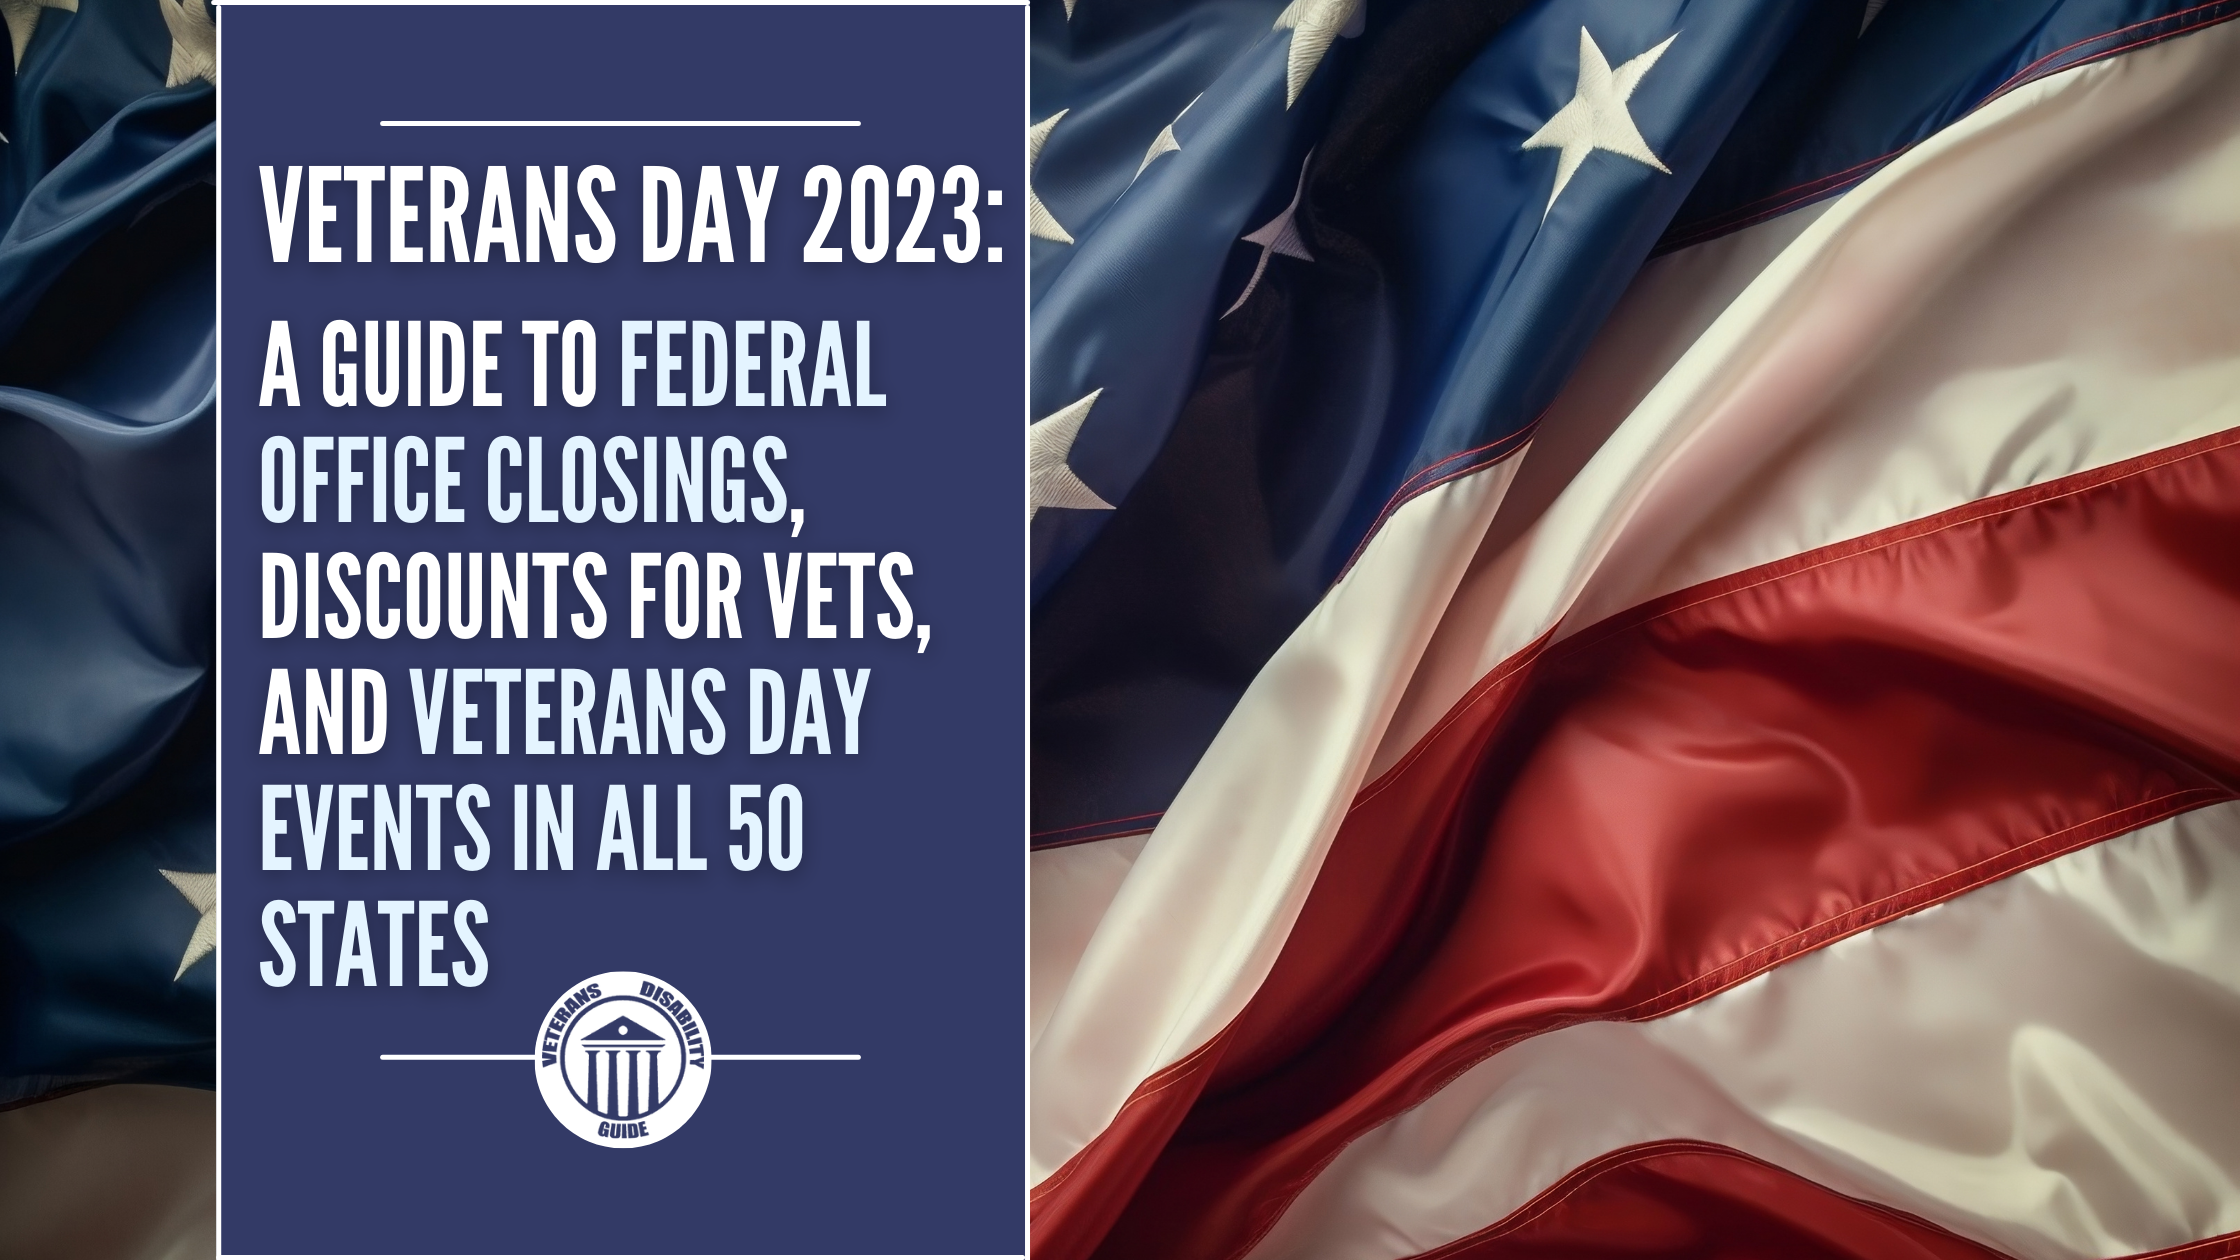 Veterans Day 2023: A Guide to Federal Office Closings, Discounts for Vets, and Veterans Day Events in All 50 States